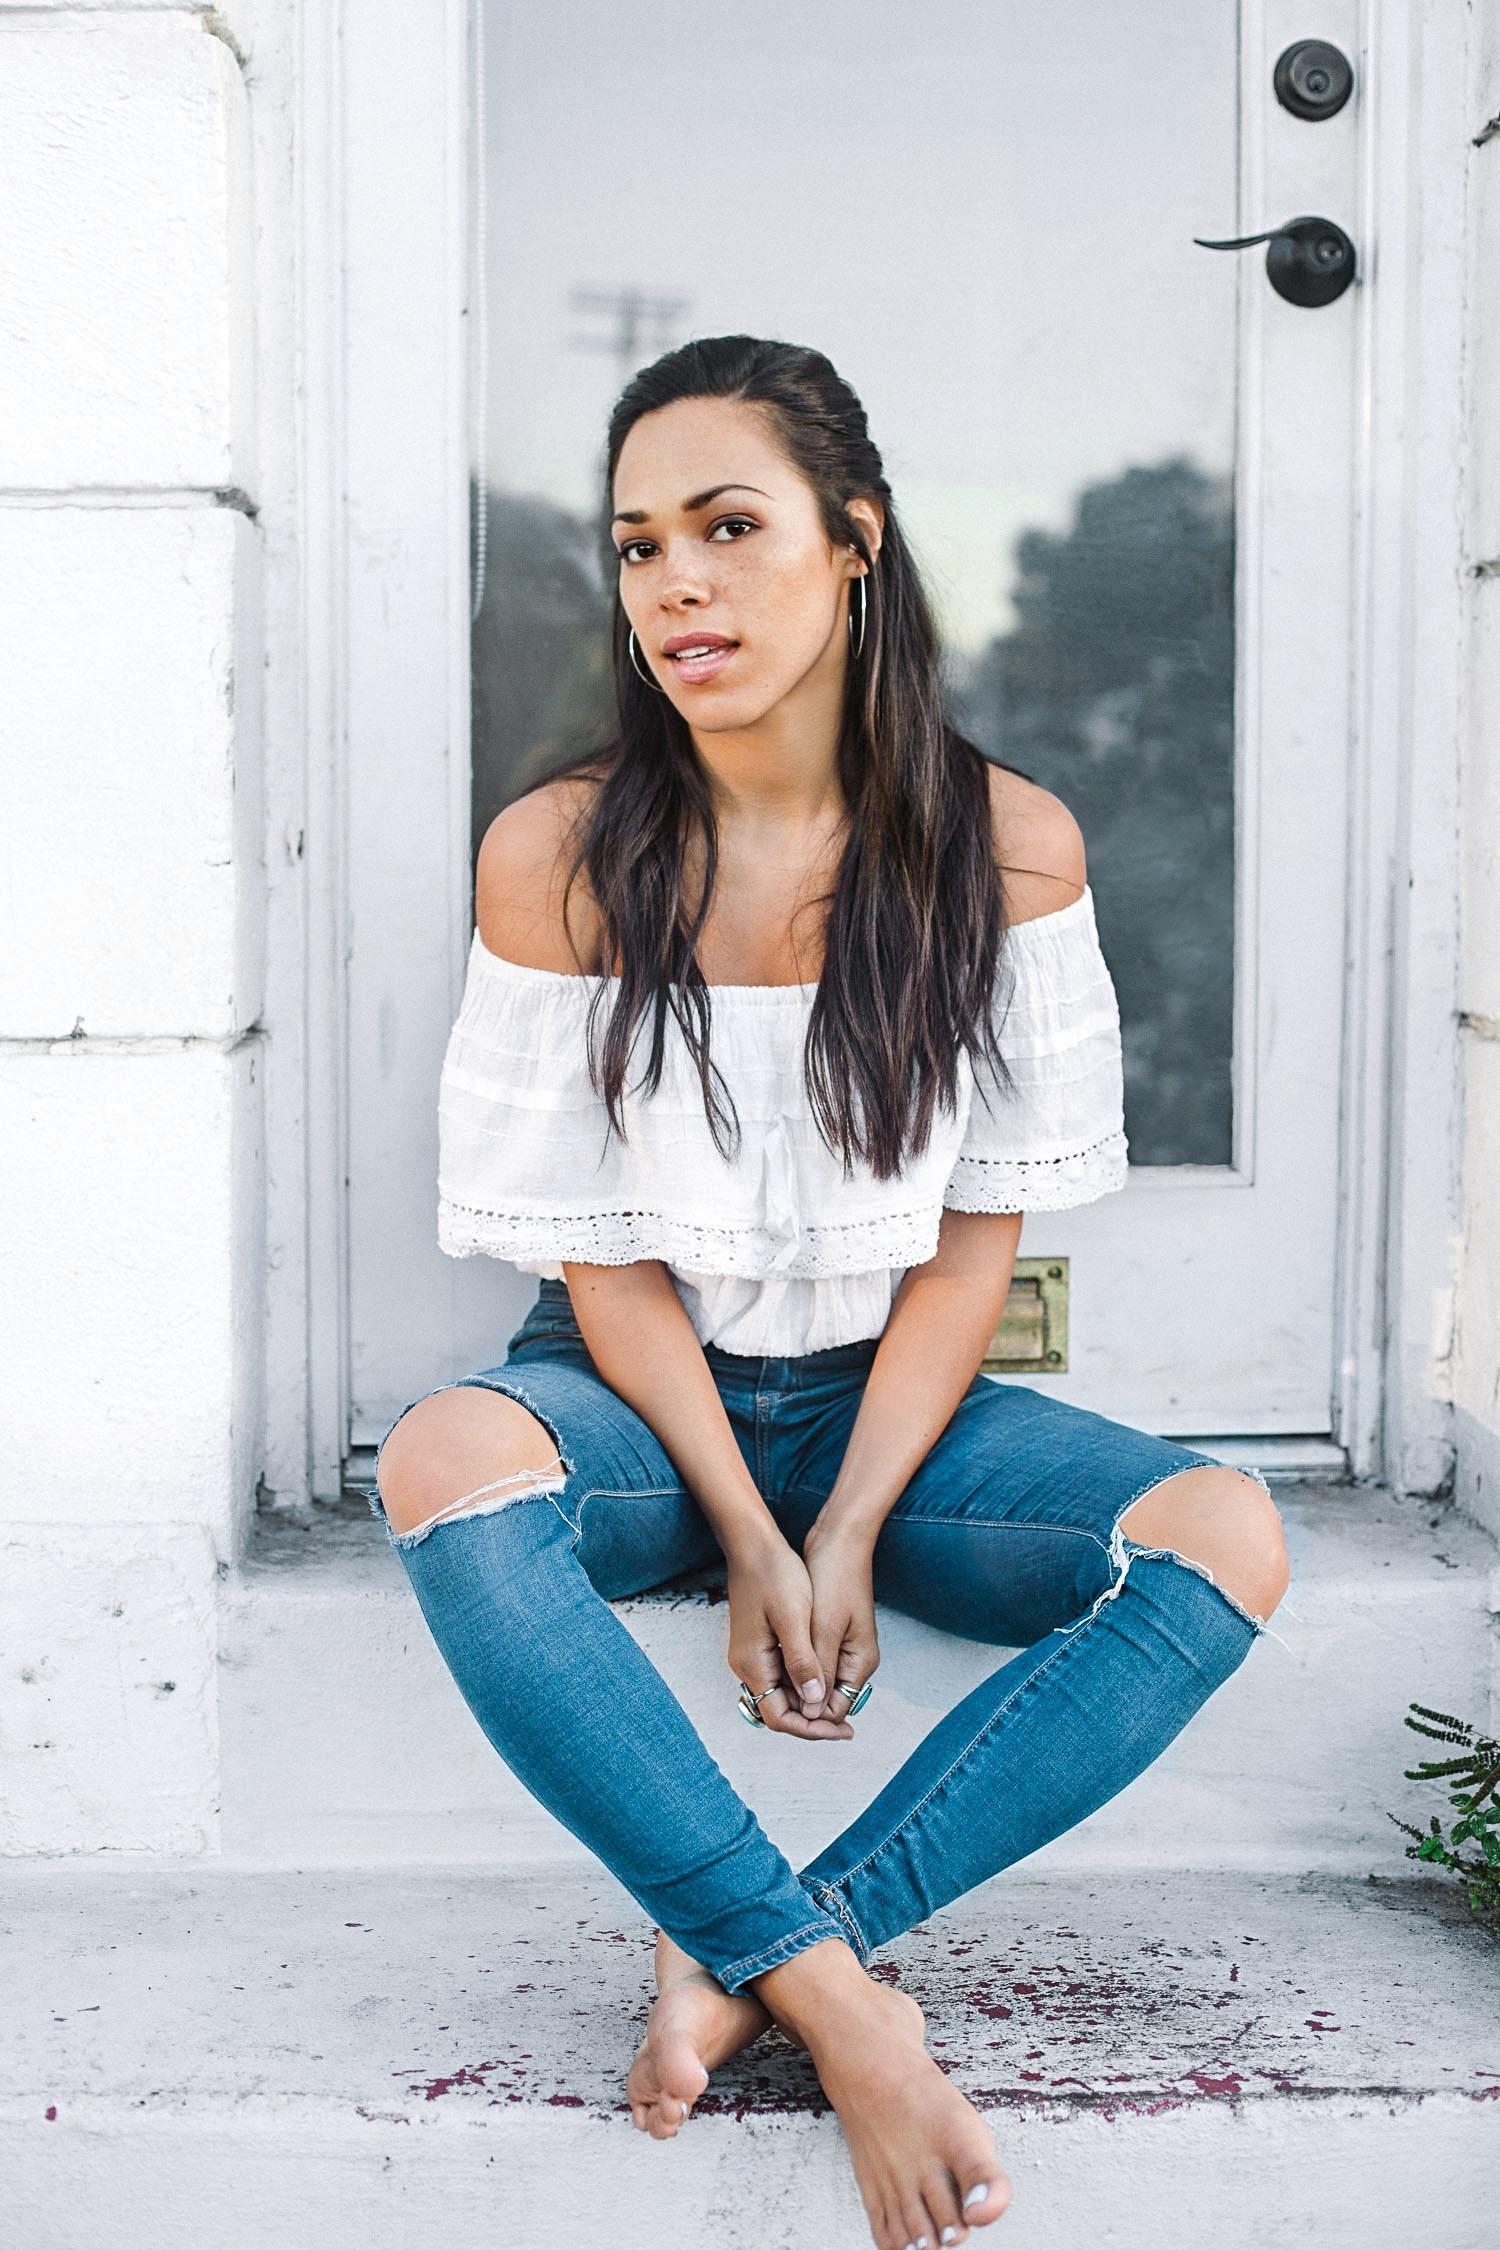 51 Sexy Jessica Camacho Boobs Pictures Will Induce Passionate Feelings for Her 16